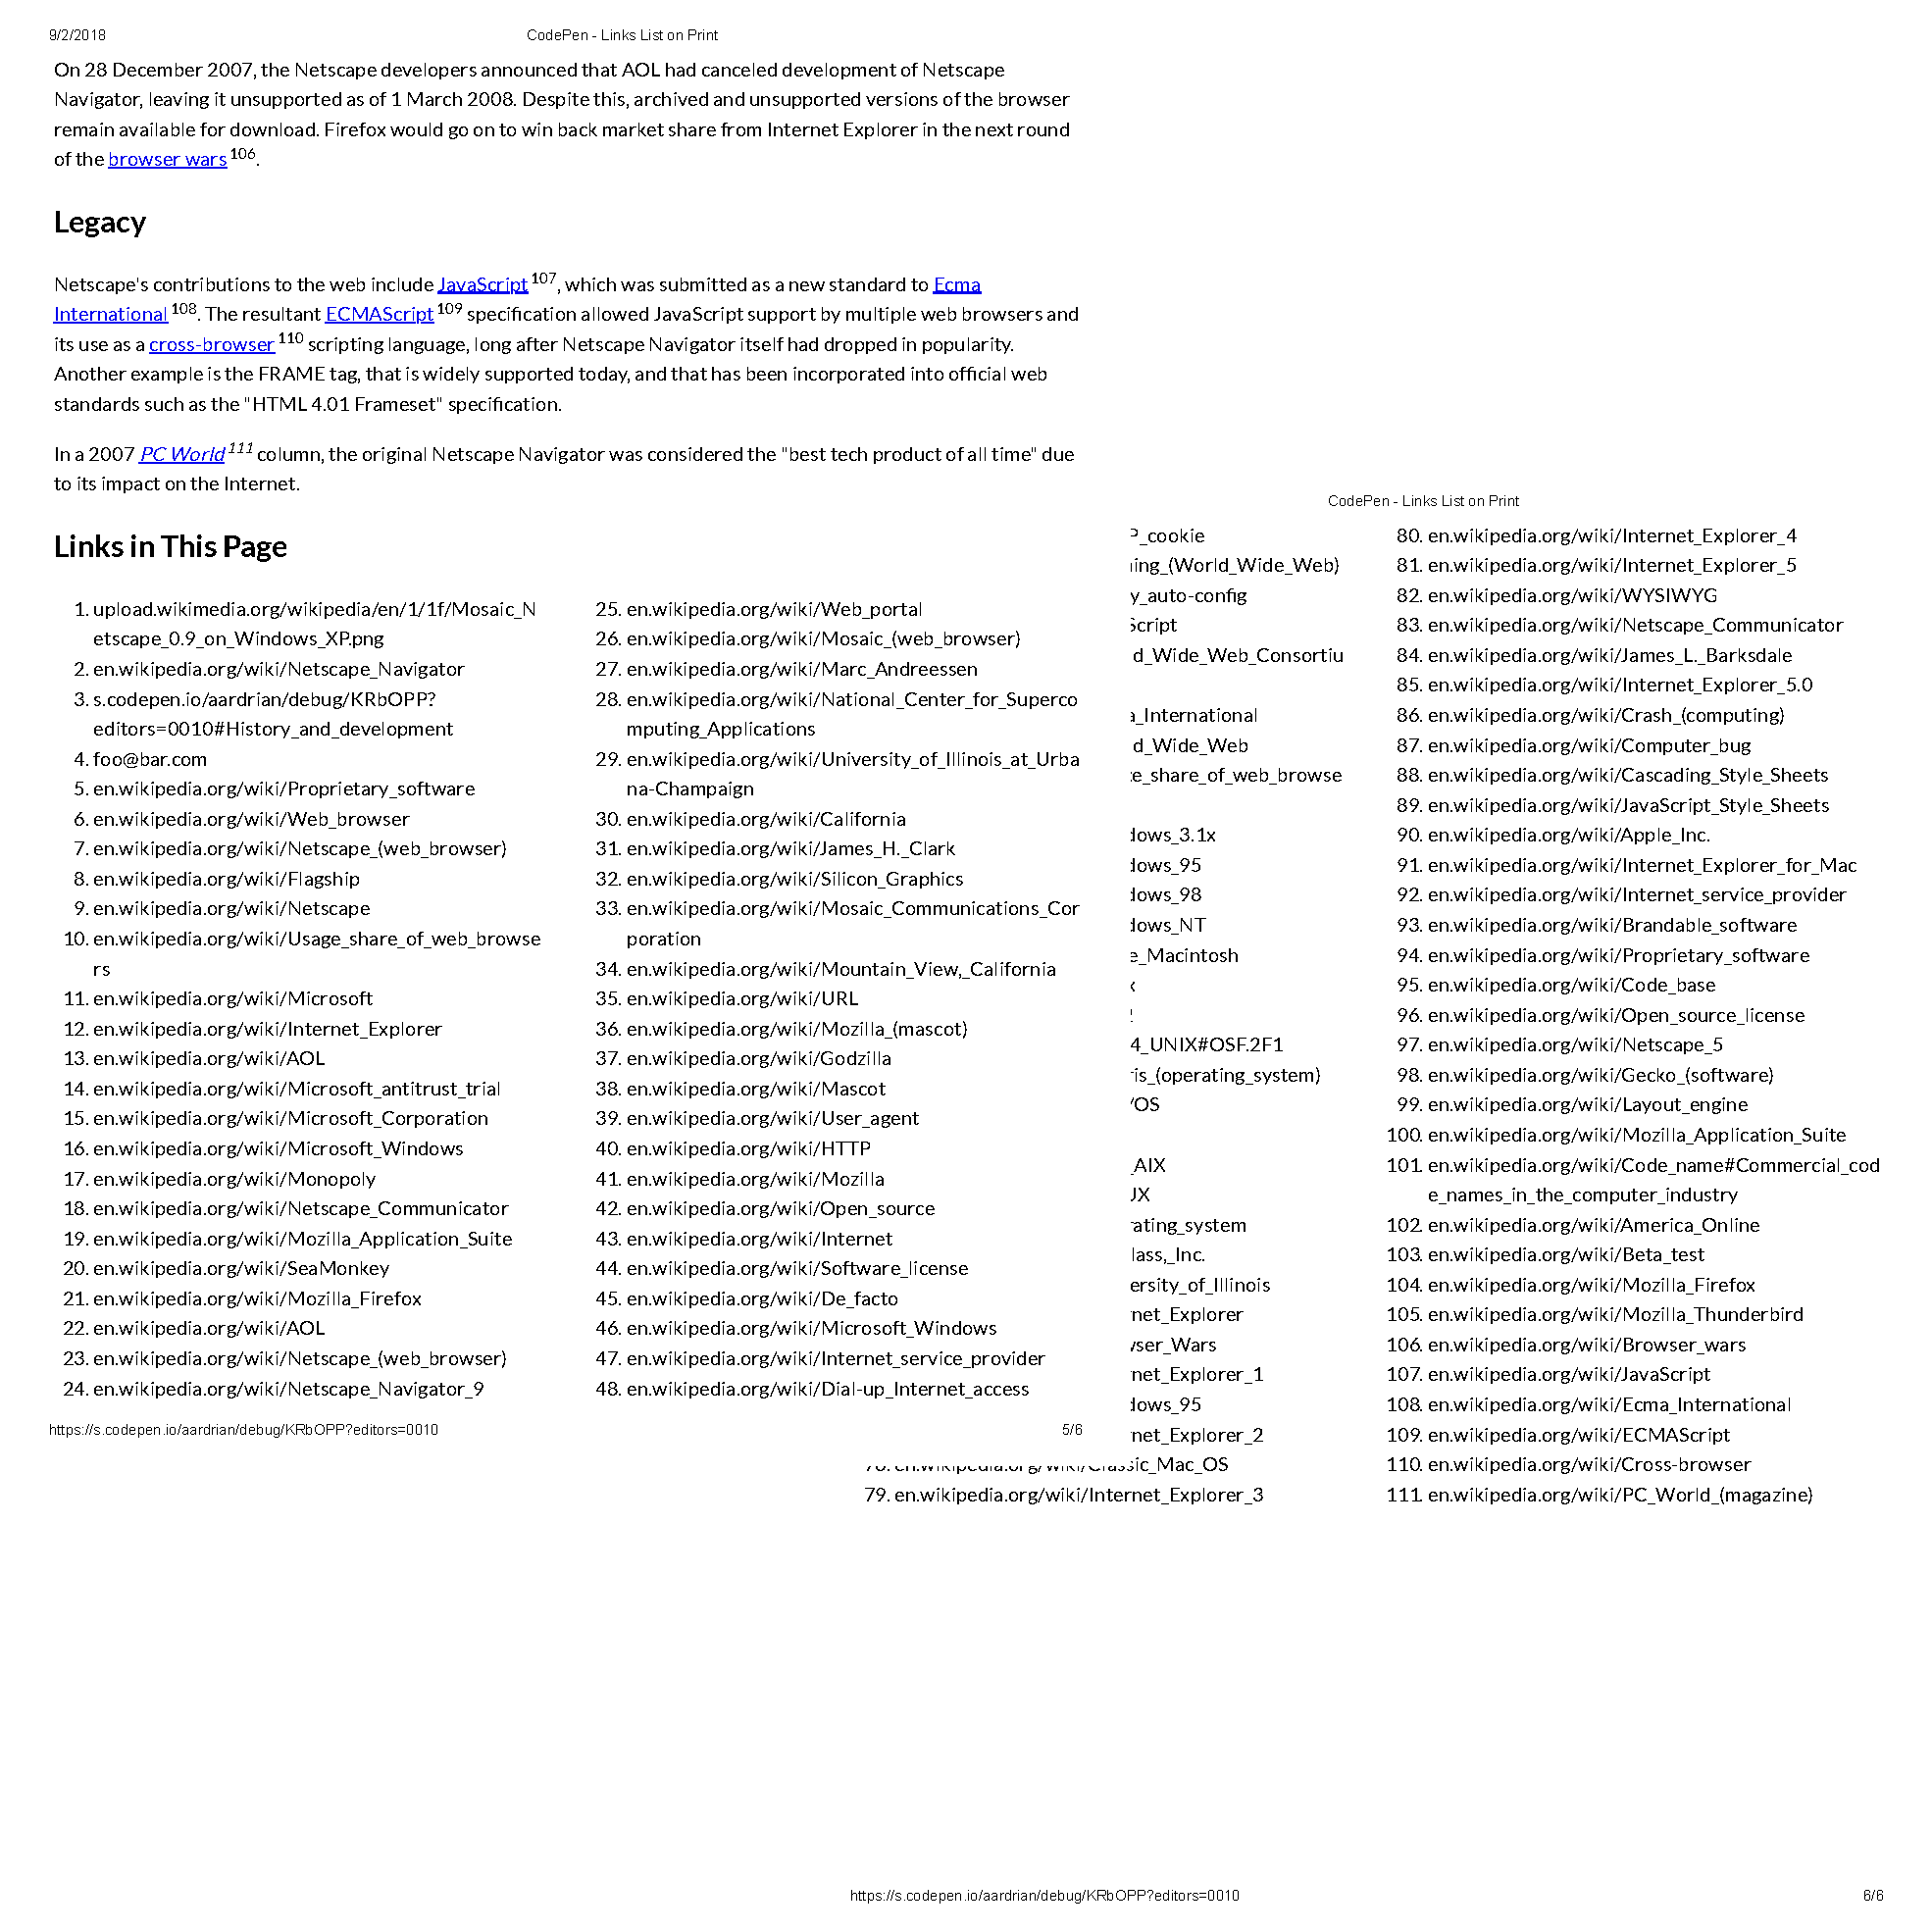 Example of a couple printed pages showing the links list.